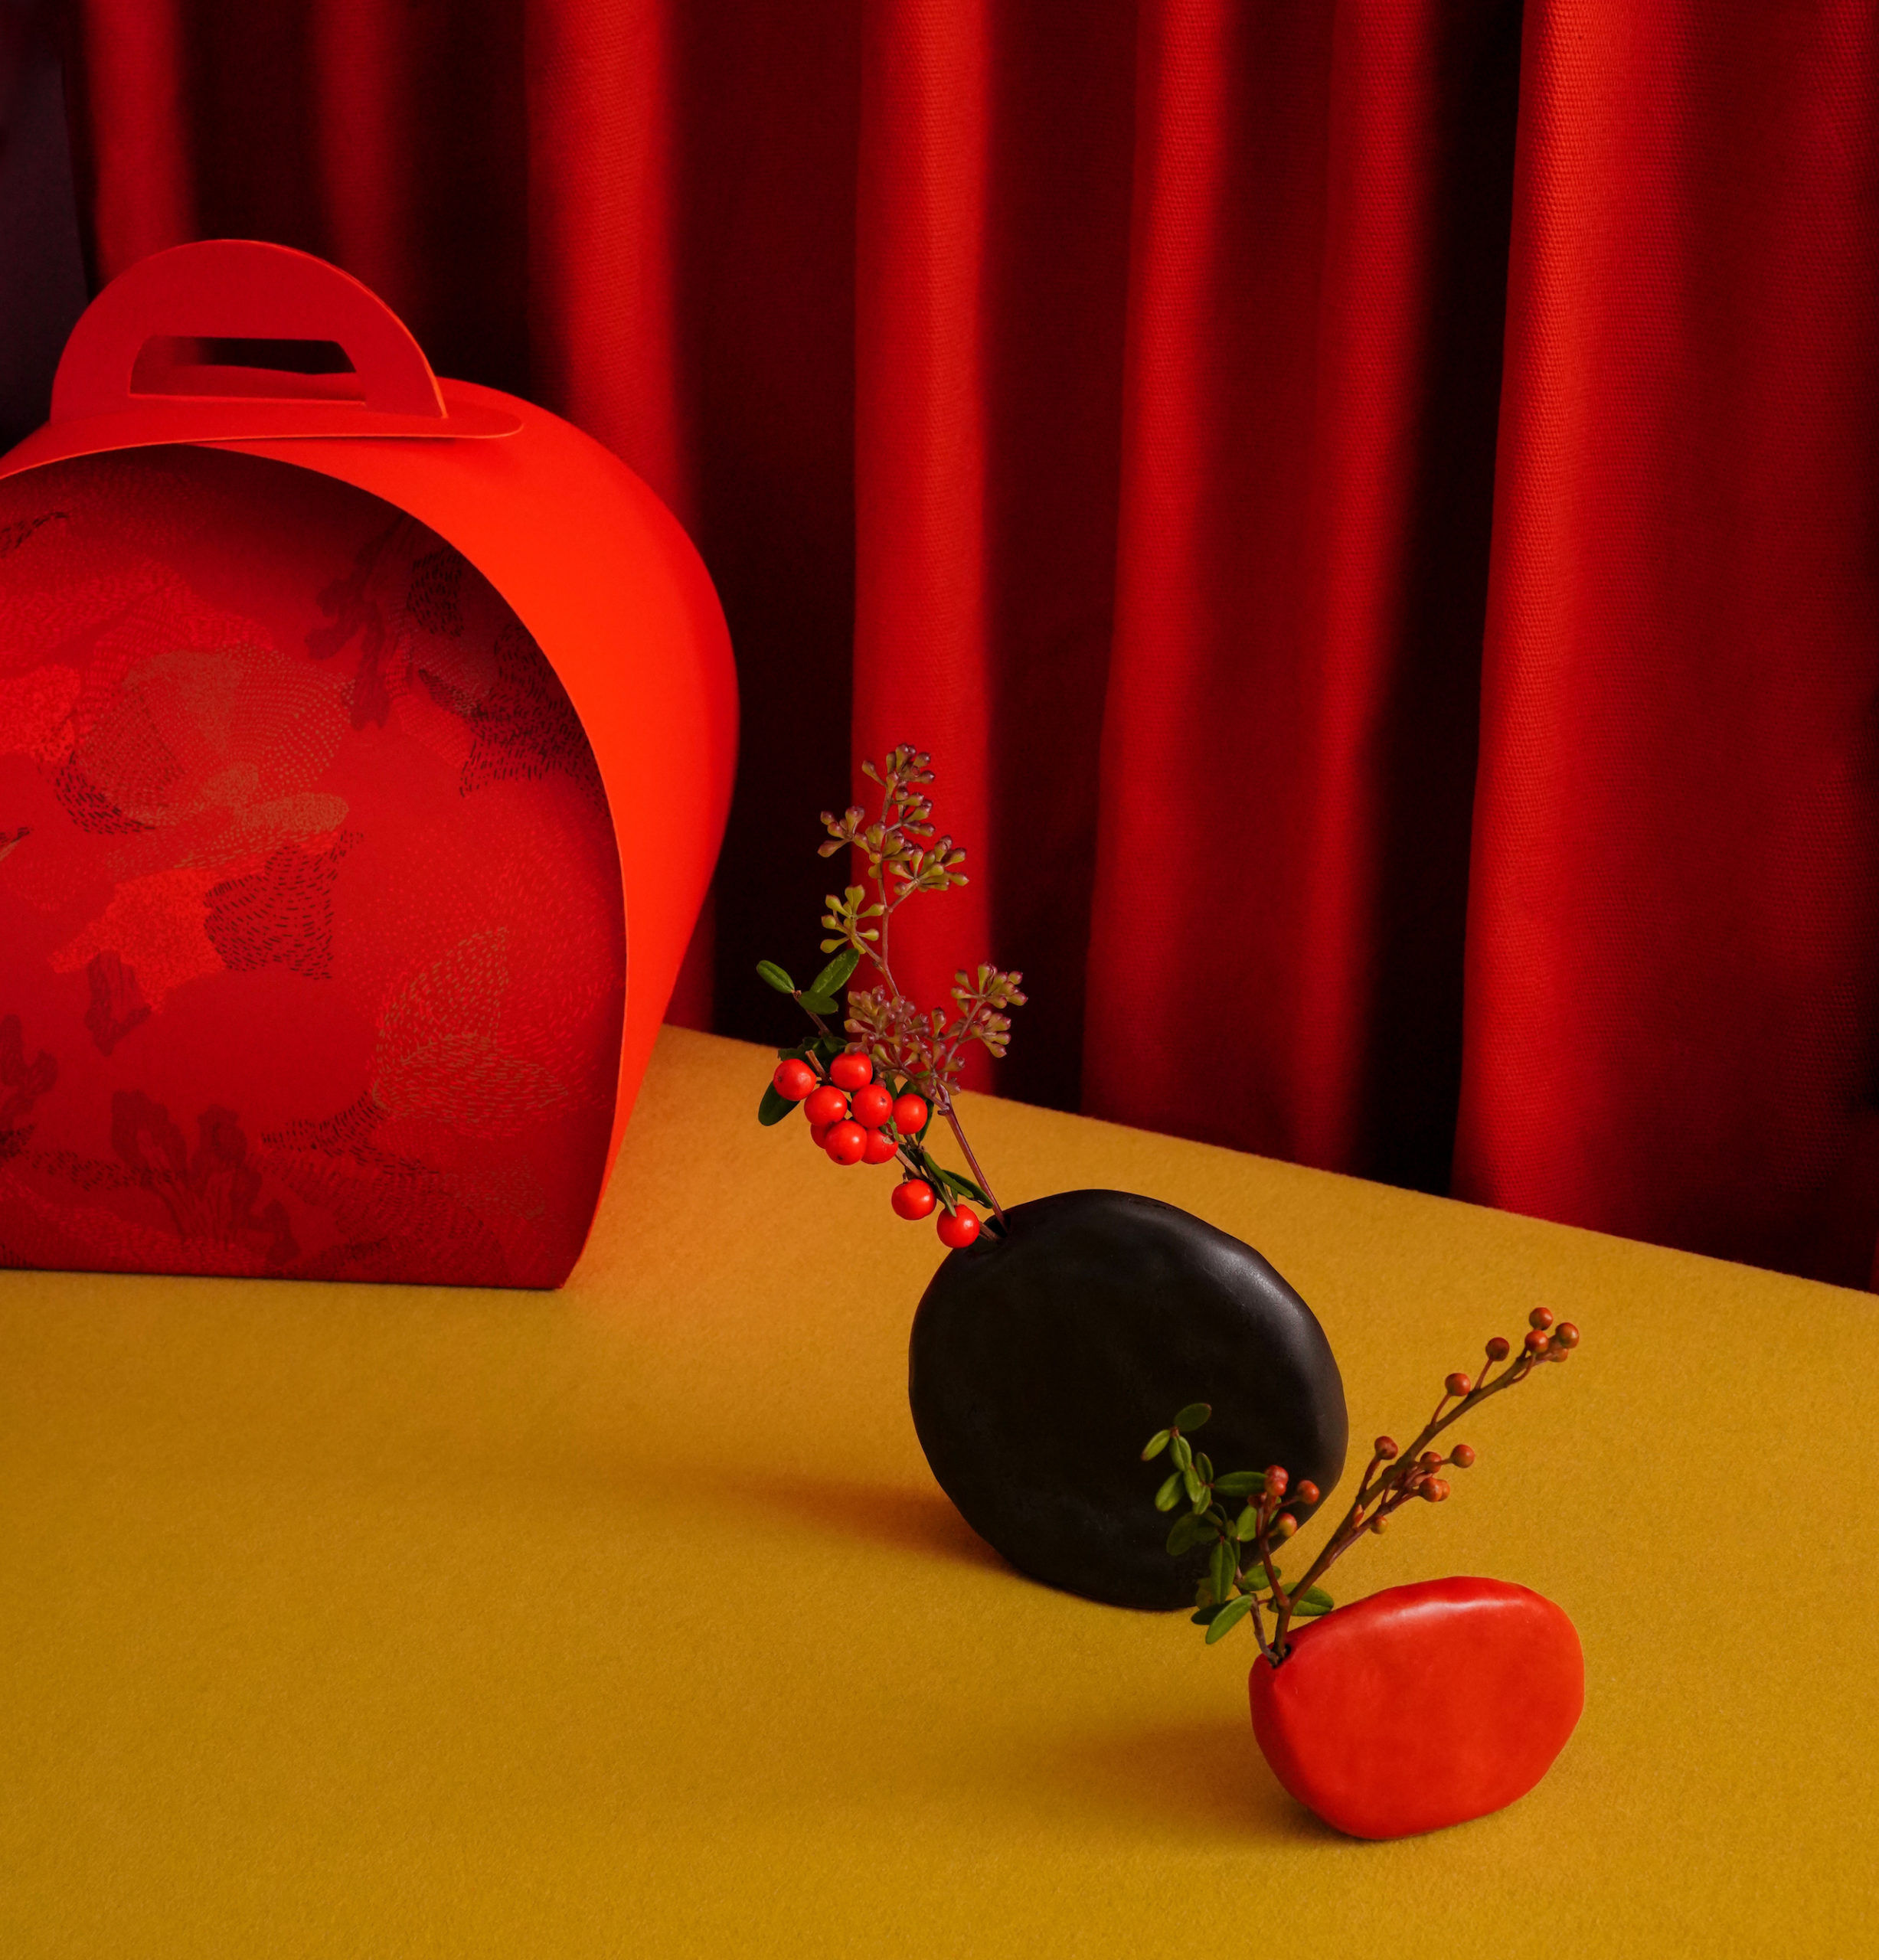 "From Darkness Comes Light" Ceramic Vases, Ruth Chao Studio (RCS) x Blooms & Blossoms